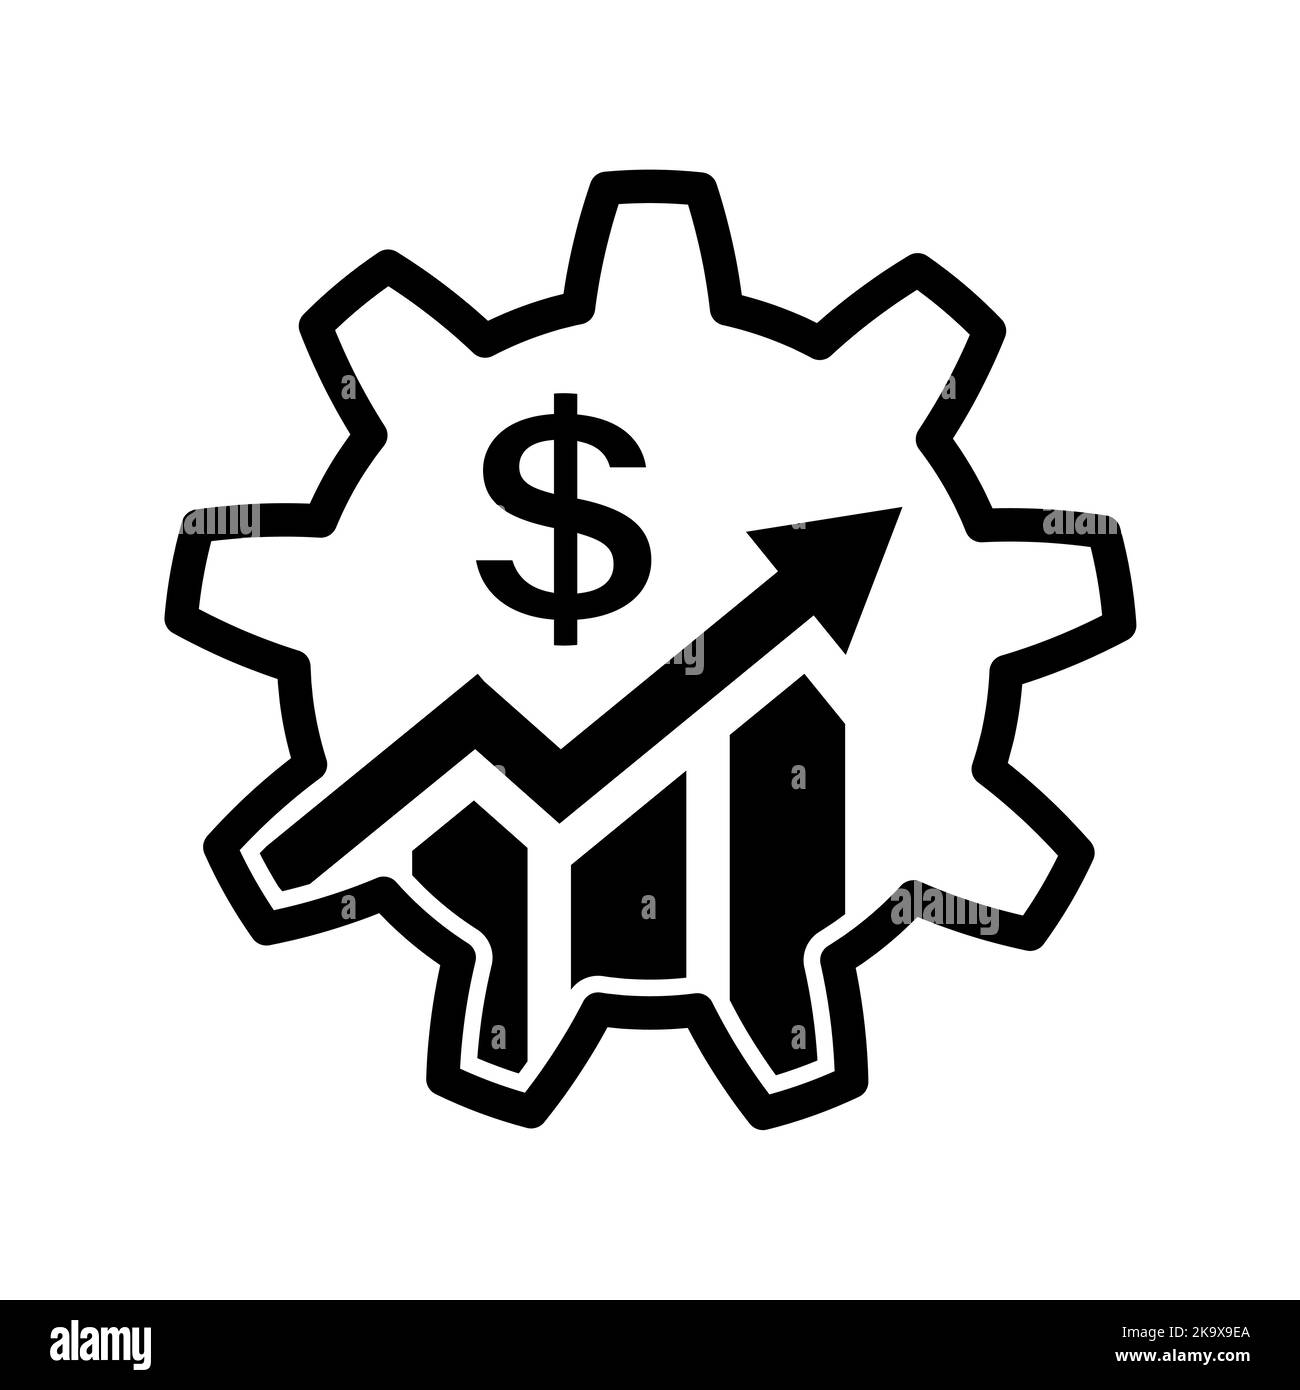 Dollar growth with gear icon. Business infographic Stock Vector